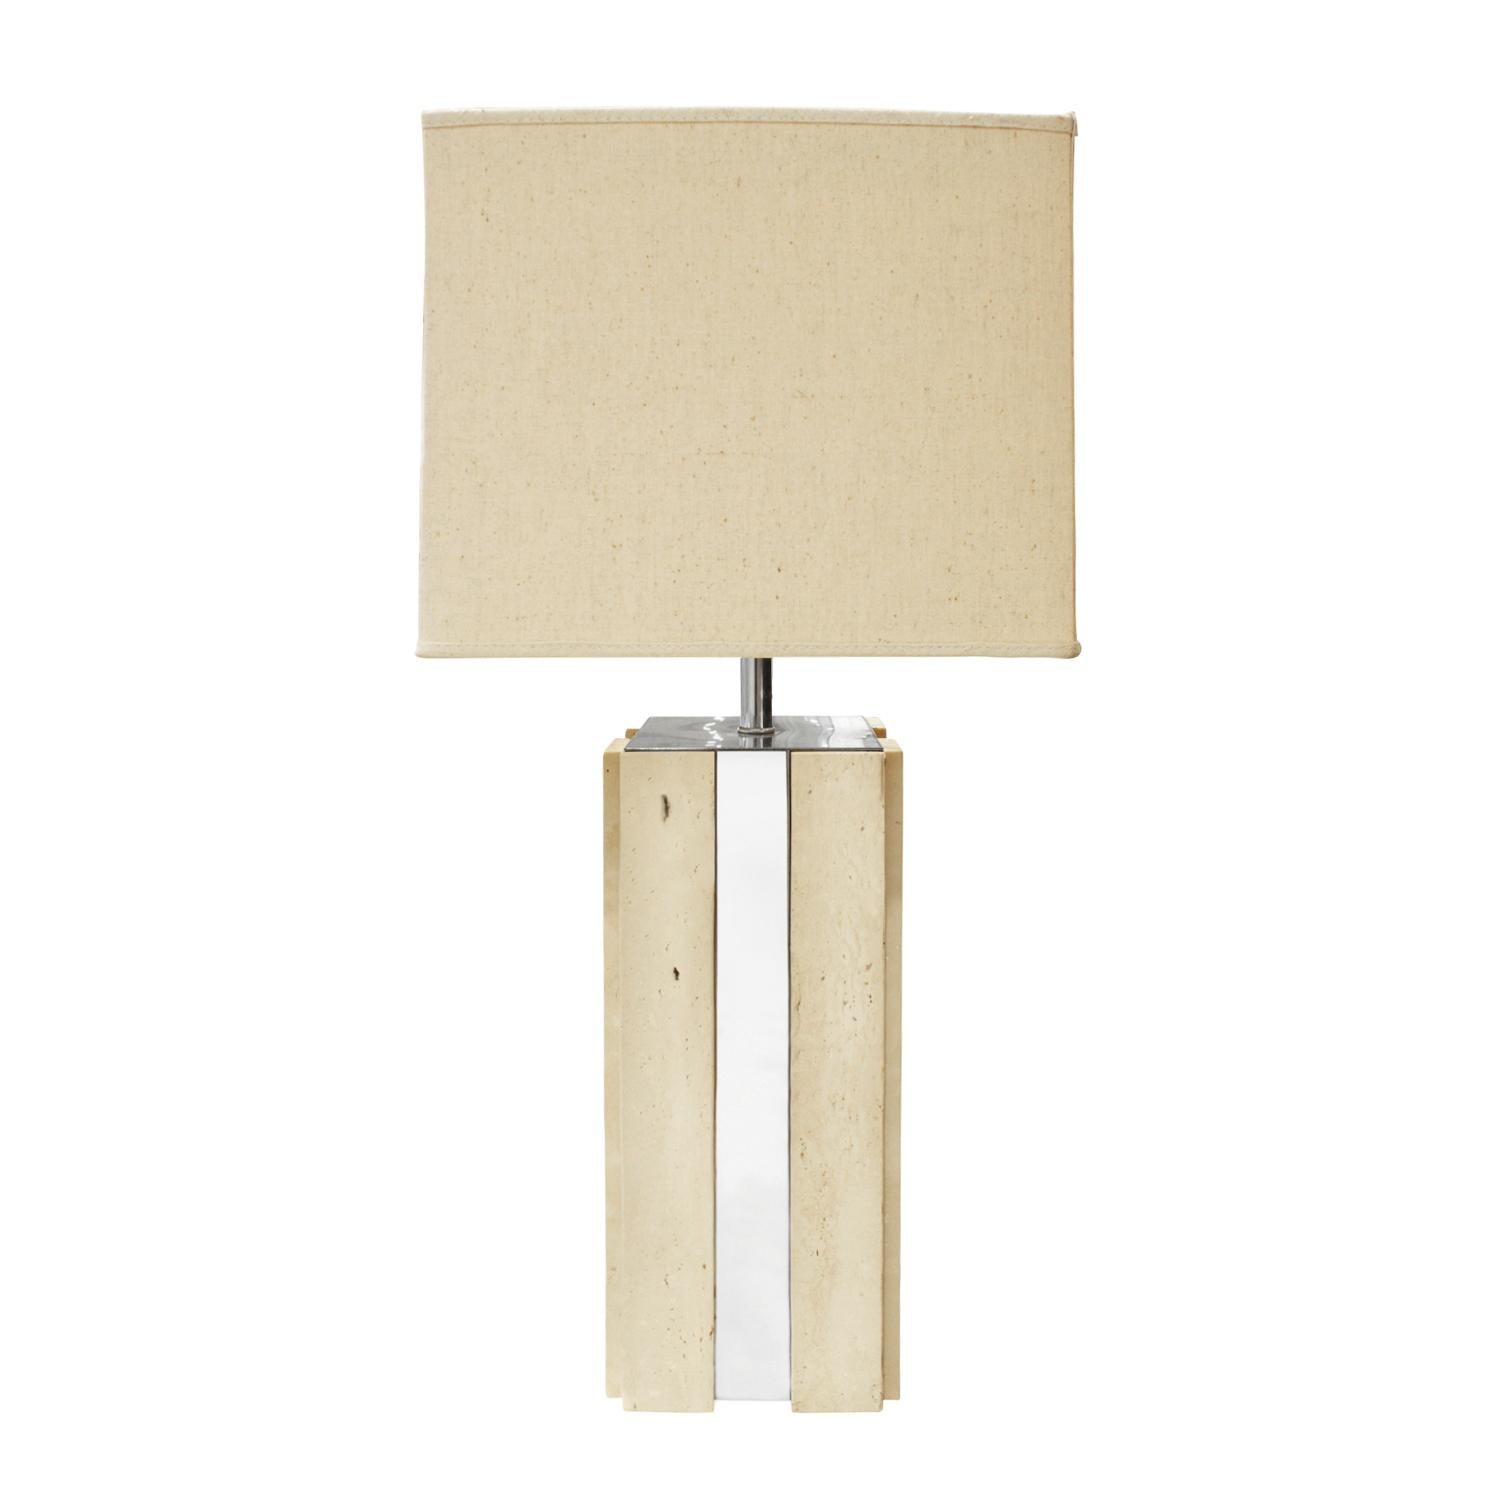 Exceptional large table lamp in travertine with vertical chrome accents, Italian 1960s. This lamp is a beautiful combination of materials. 

Measures: Shade W: 16 inches
Shade D: 16 incehes
Shade H: 11.5 inches.